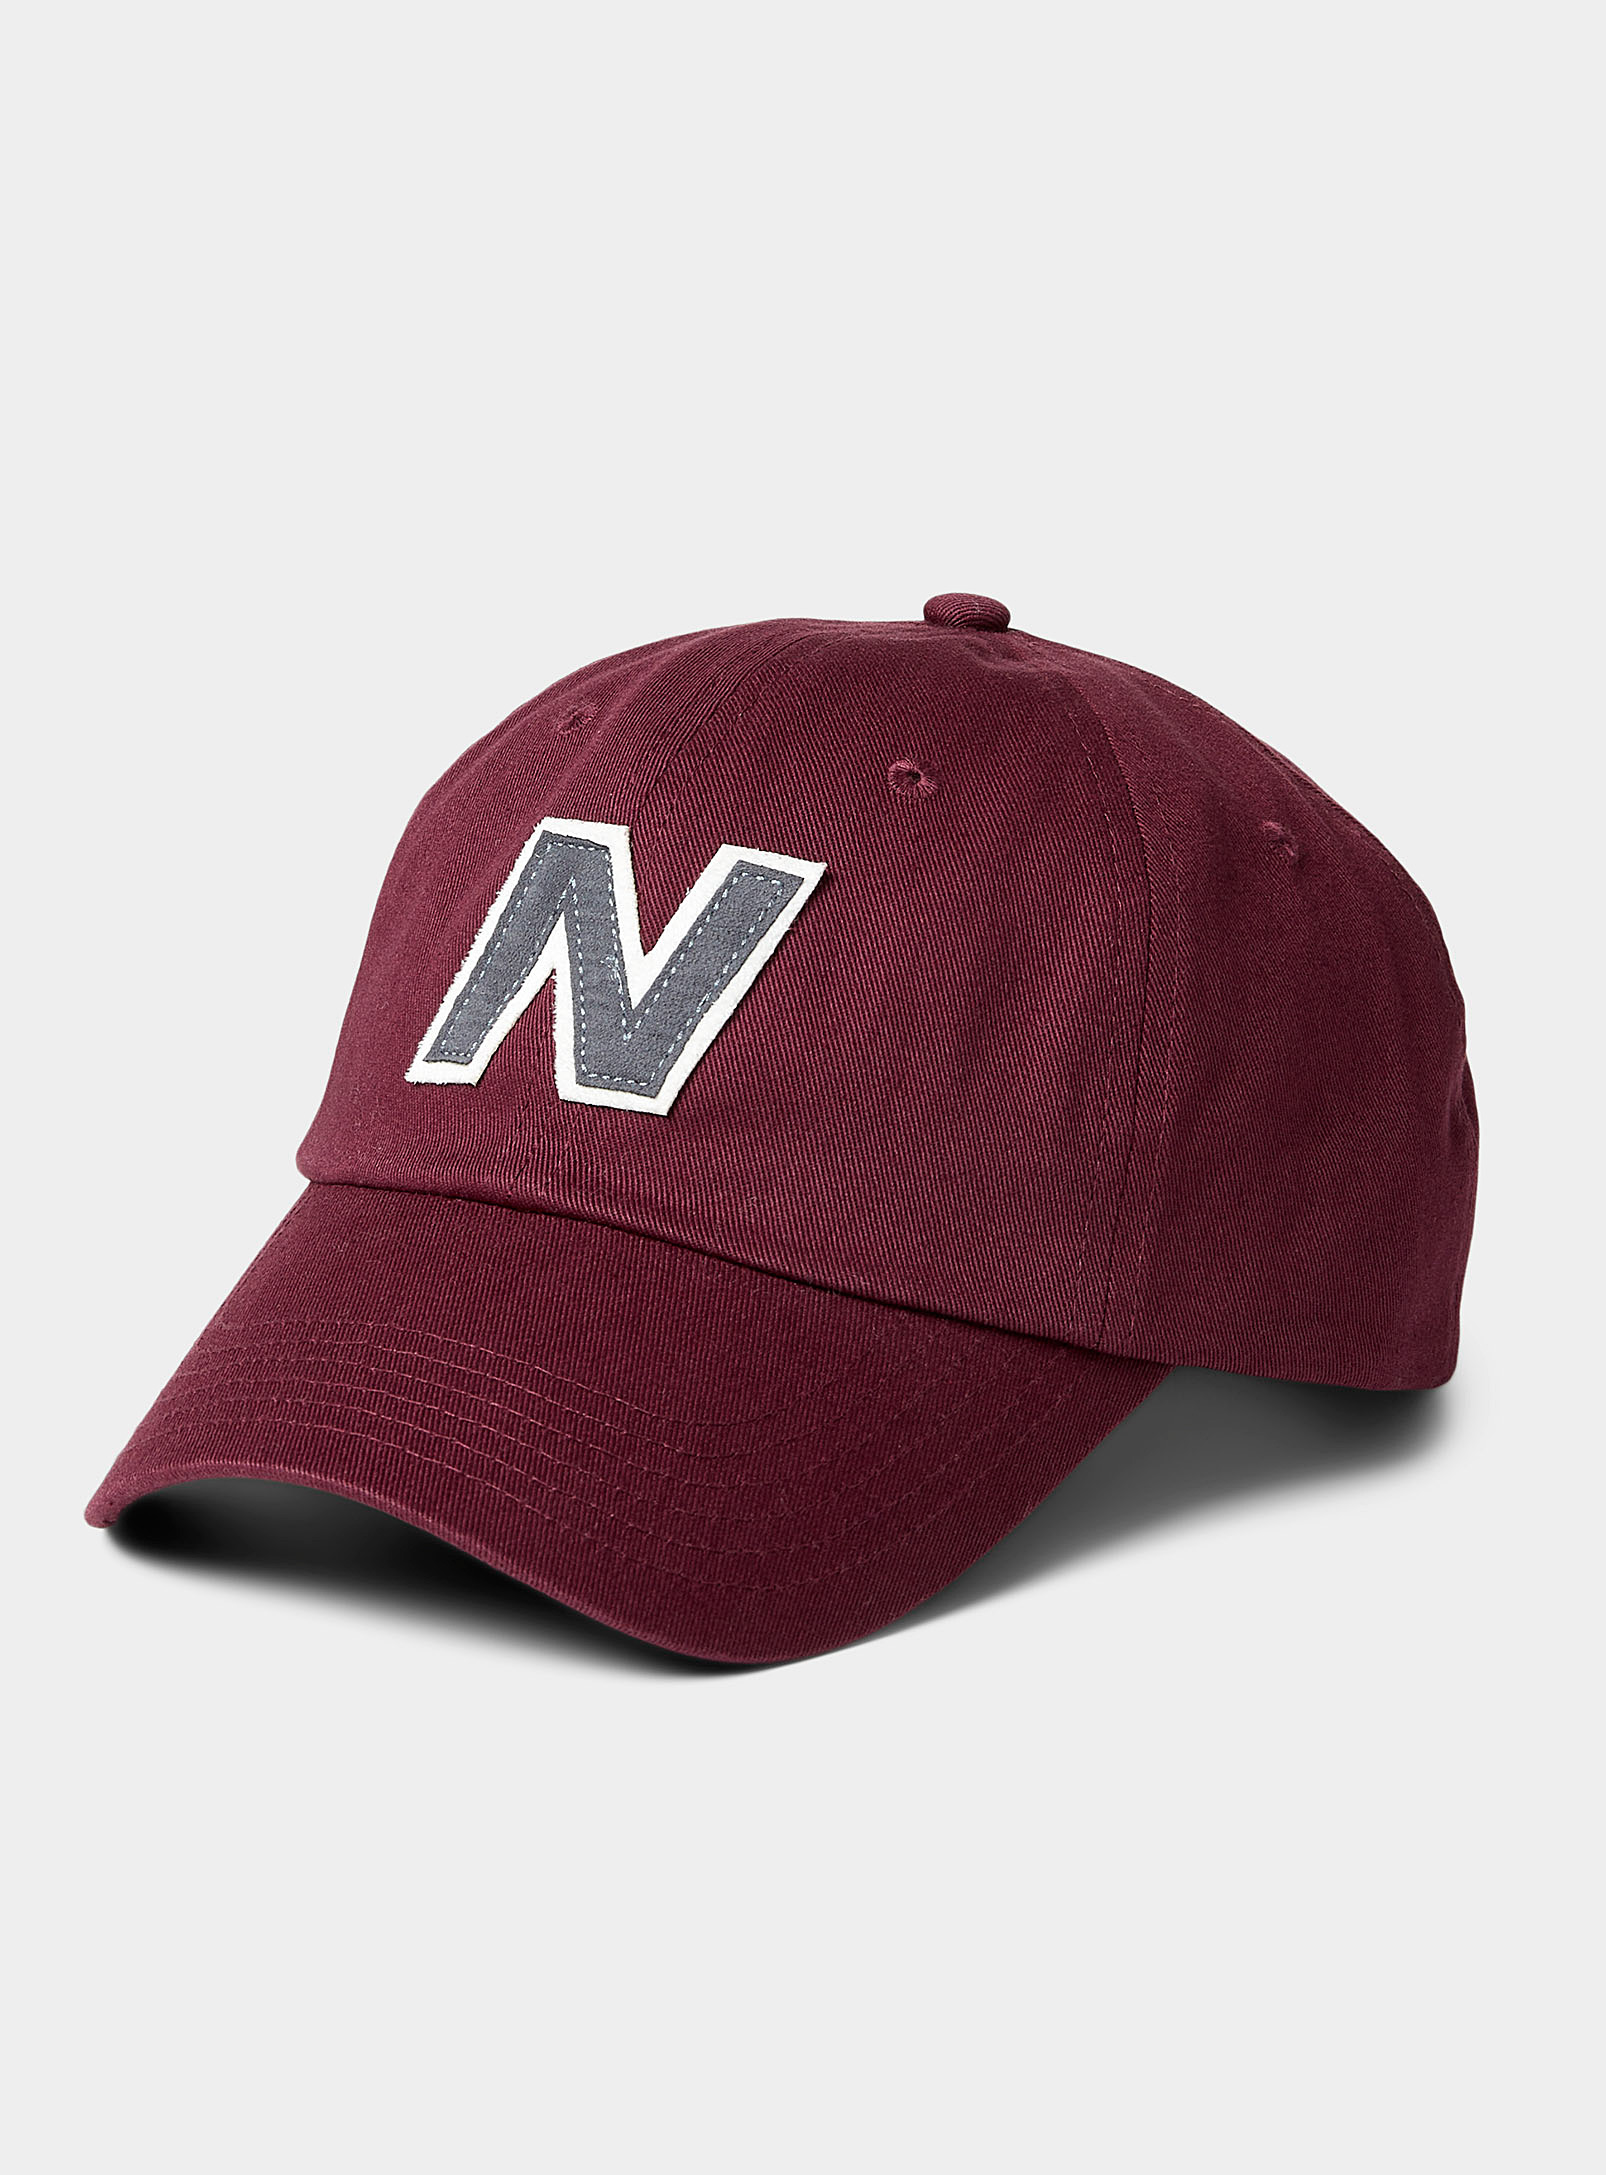 New Balance Logo Patch Baseball Cap In Ruby Red